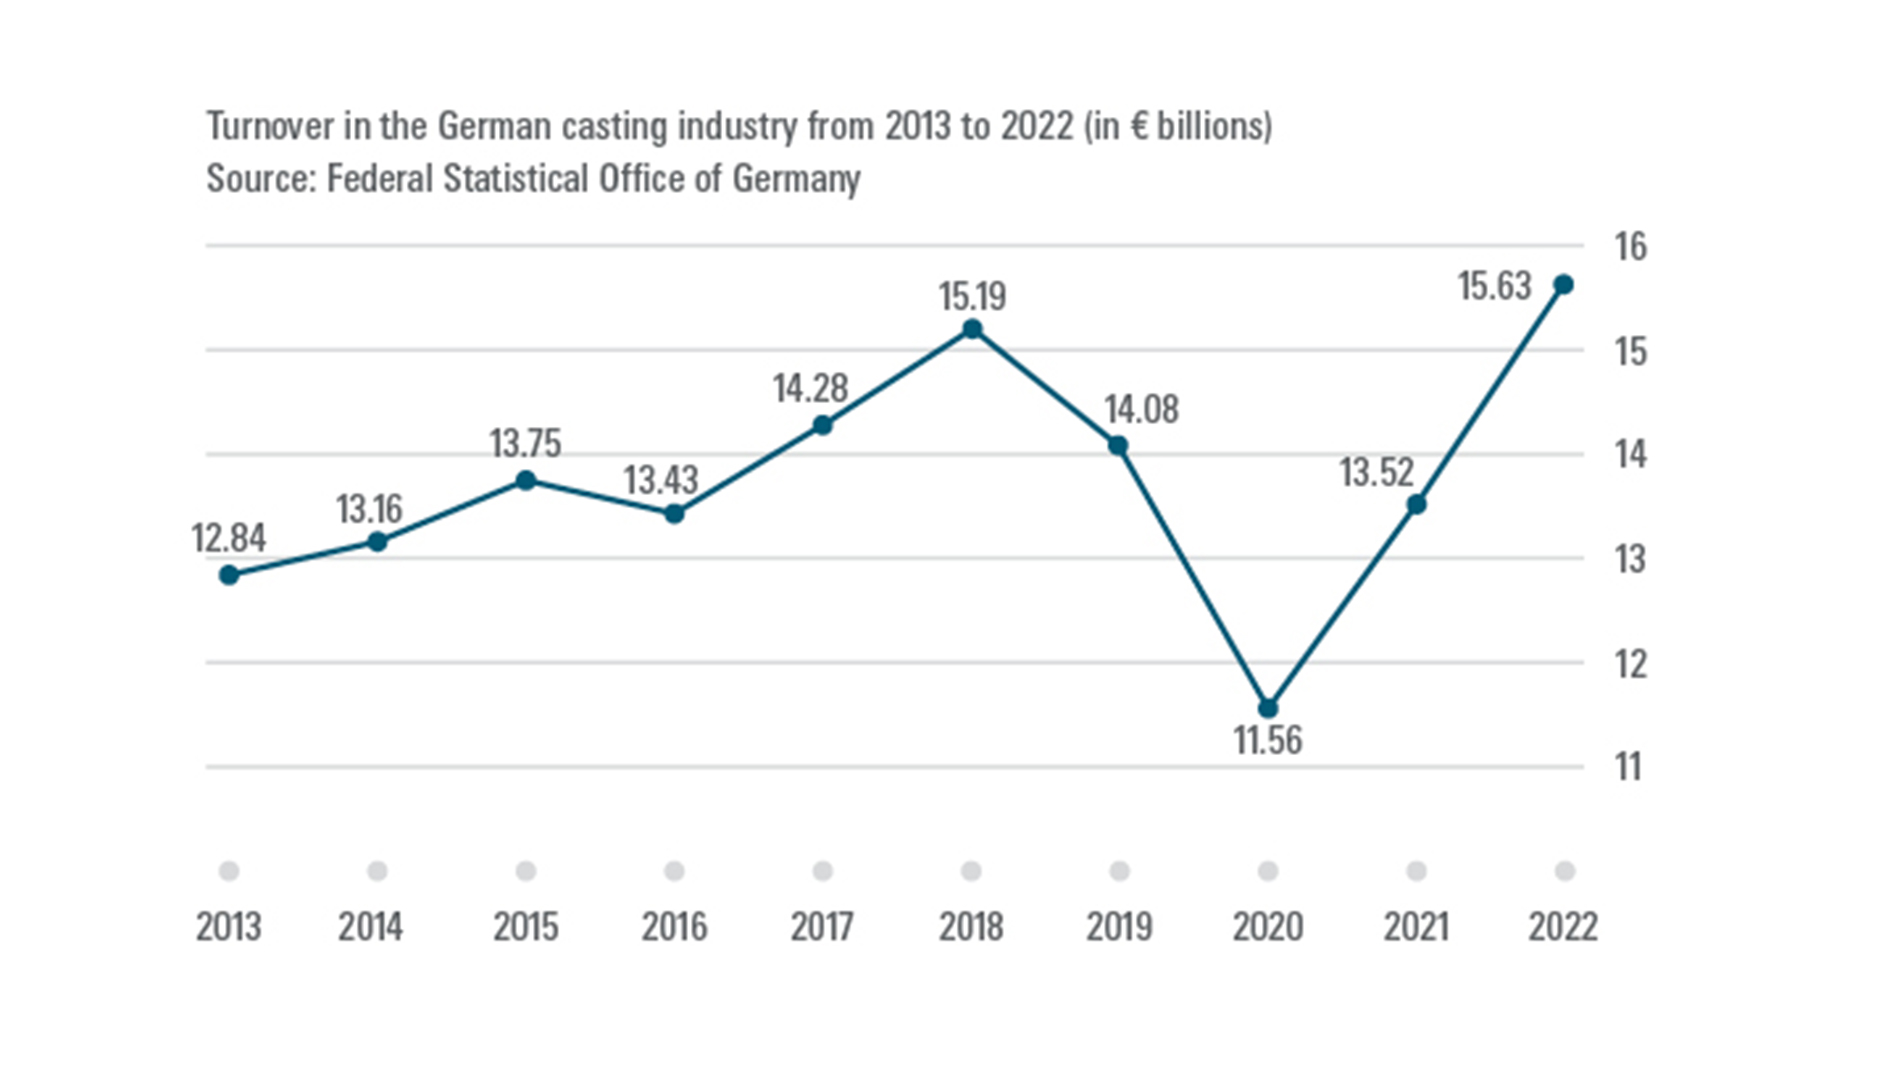 Turnover in the German casting industry from 2013 to 2022 (in € billions) Source: Federal Statistical Office of Germany